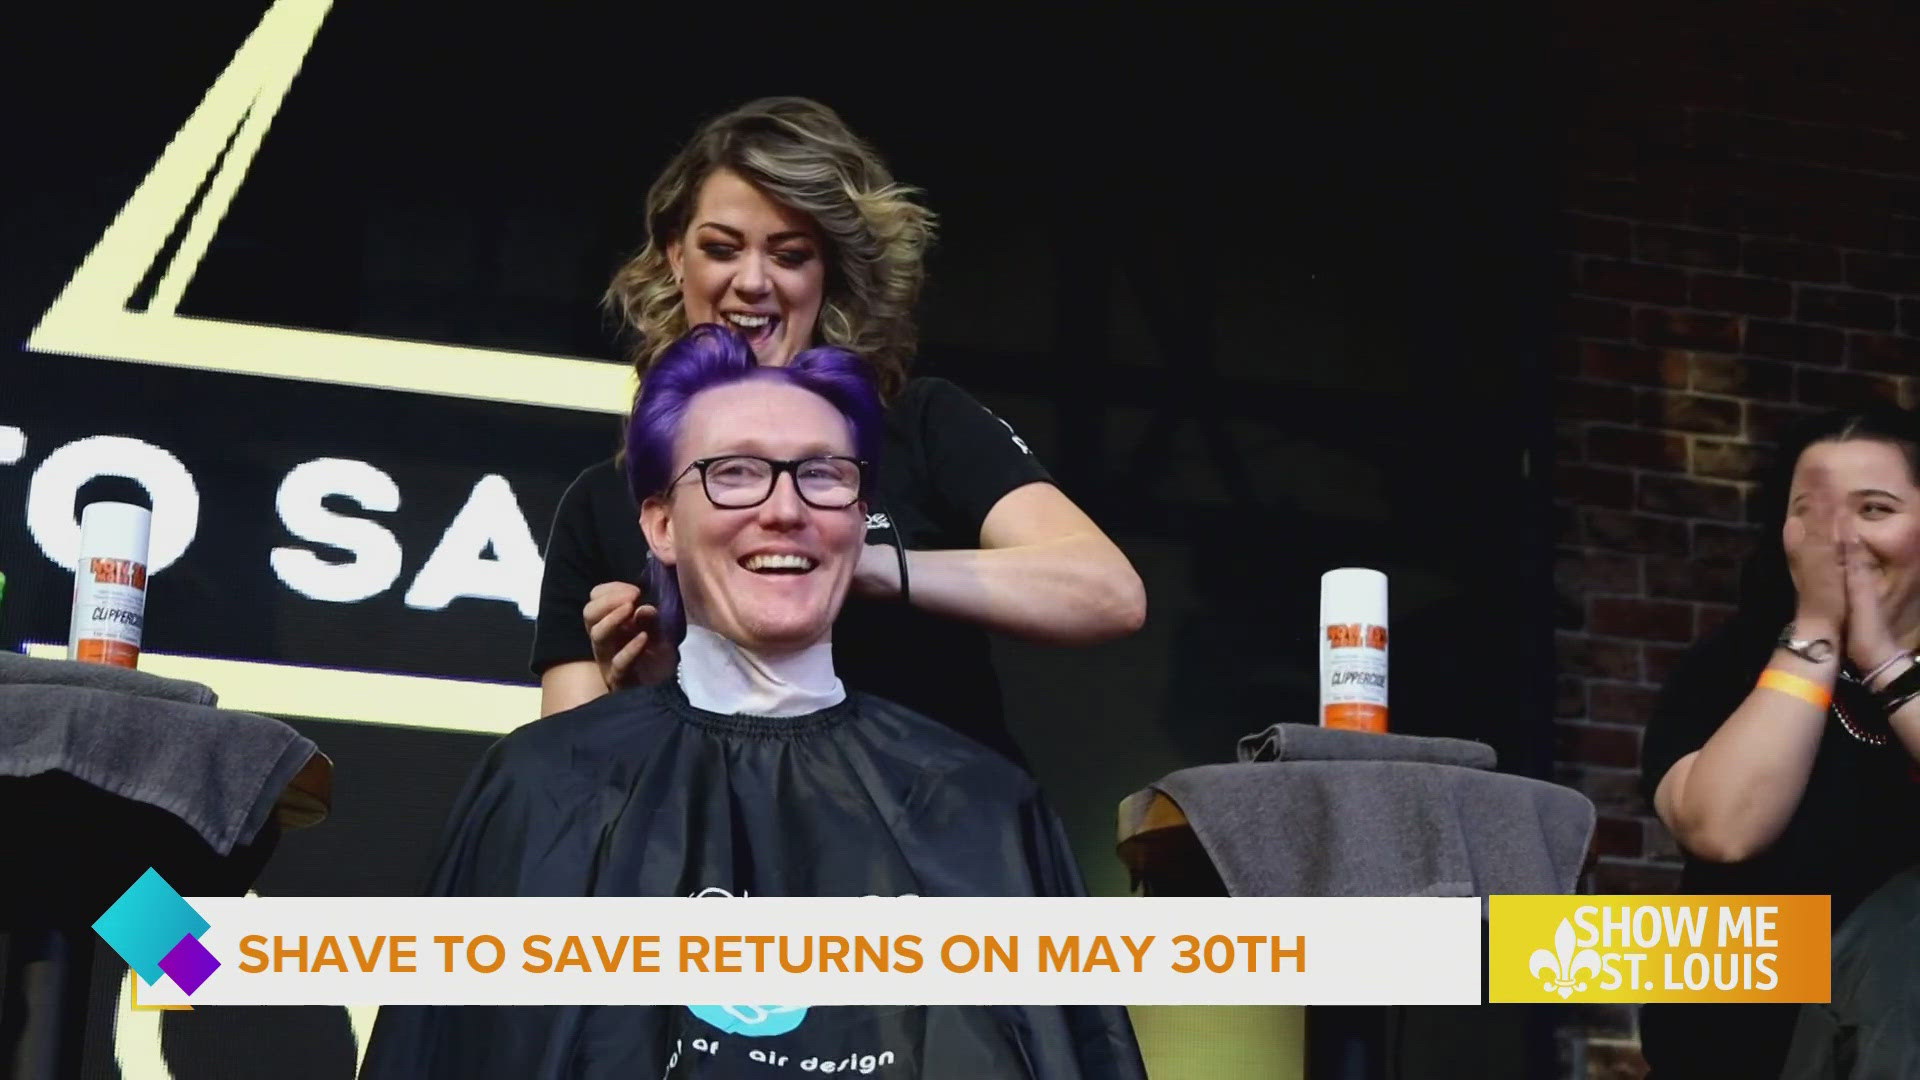 It is a cause that goes beyond the haircut! Learn how you can support The Hope Lodge St. Louis at their Shave to Save event.